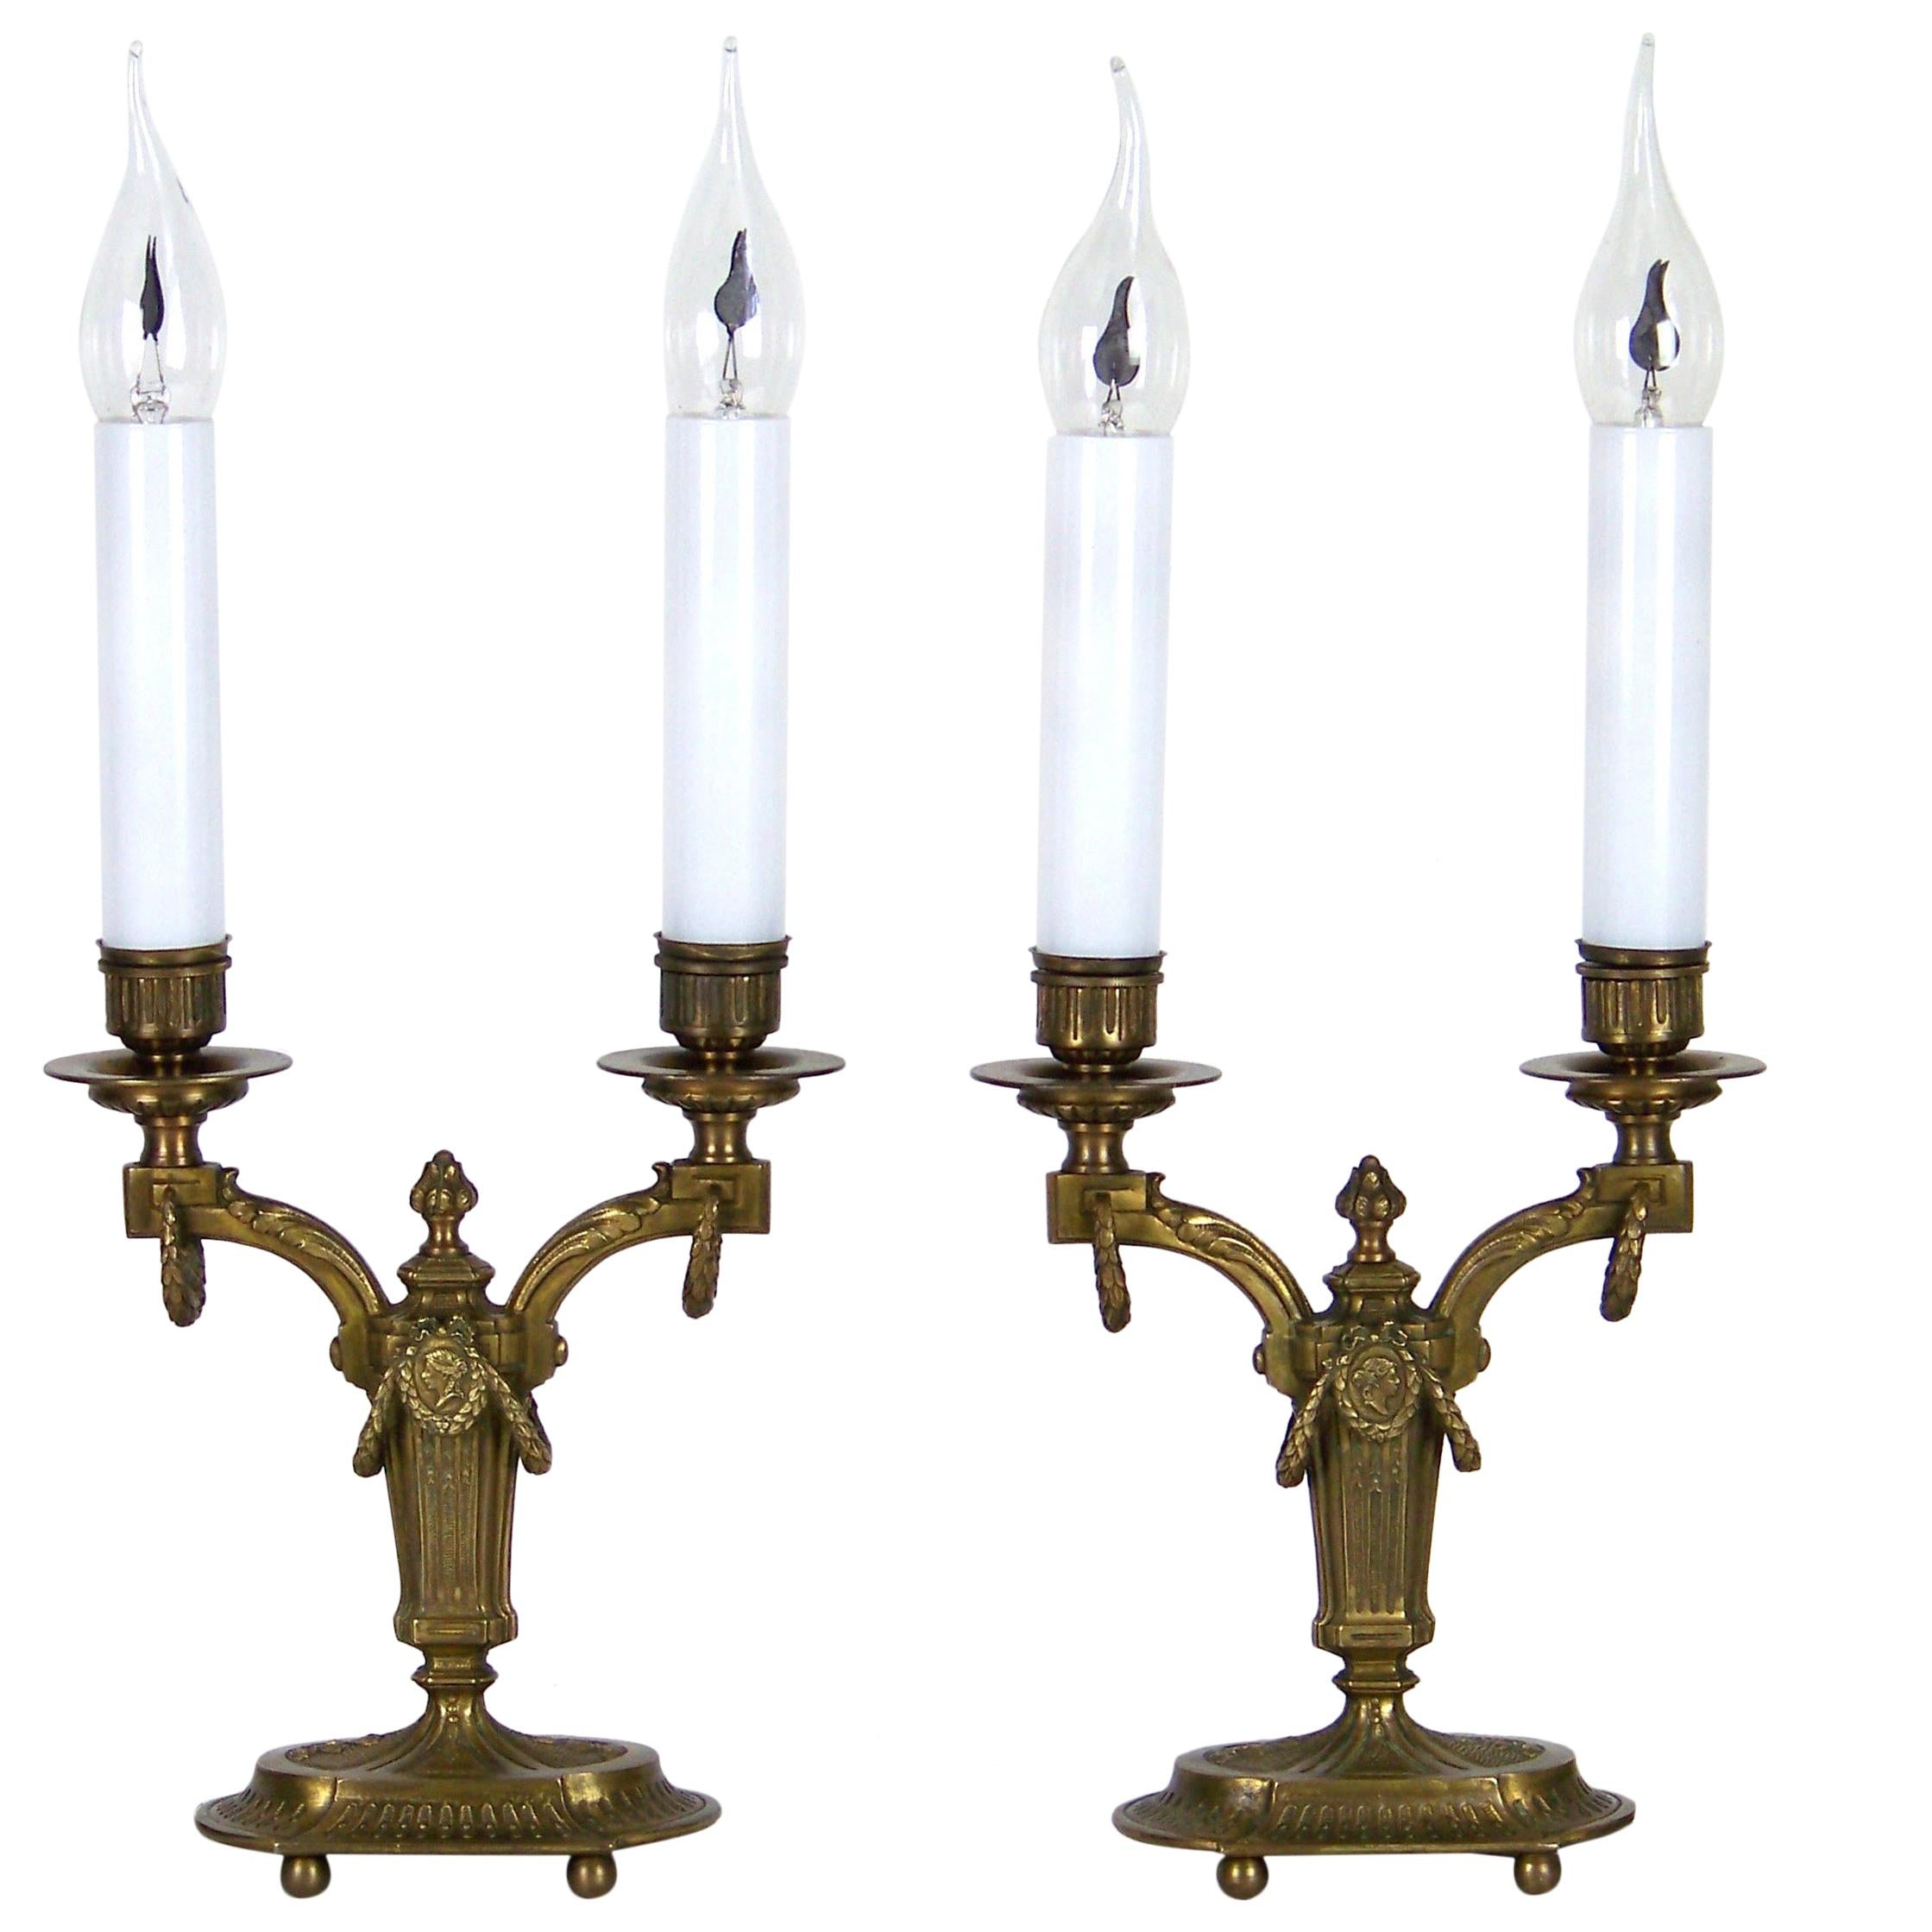 Brass Electric Candlesticks with Fine Chiselling For Sale